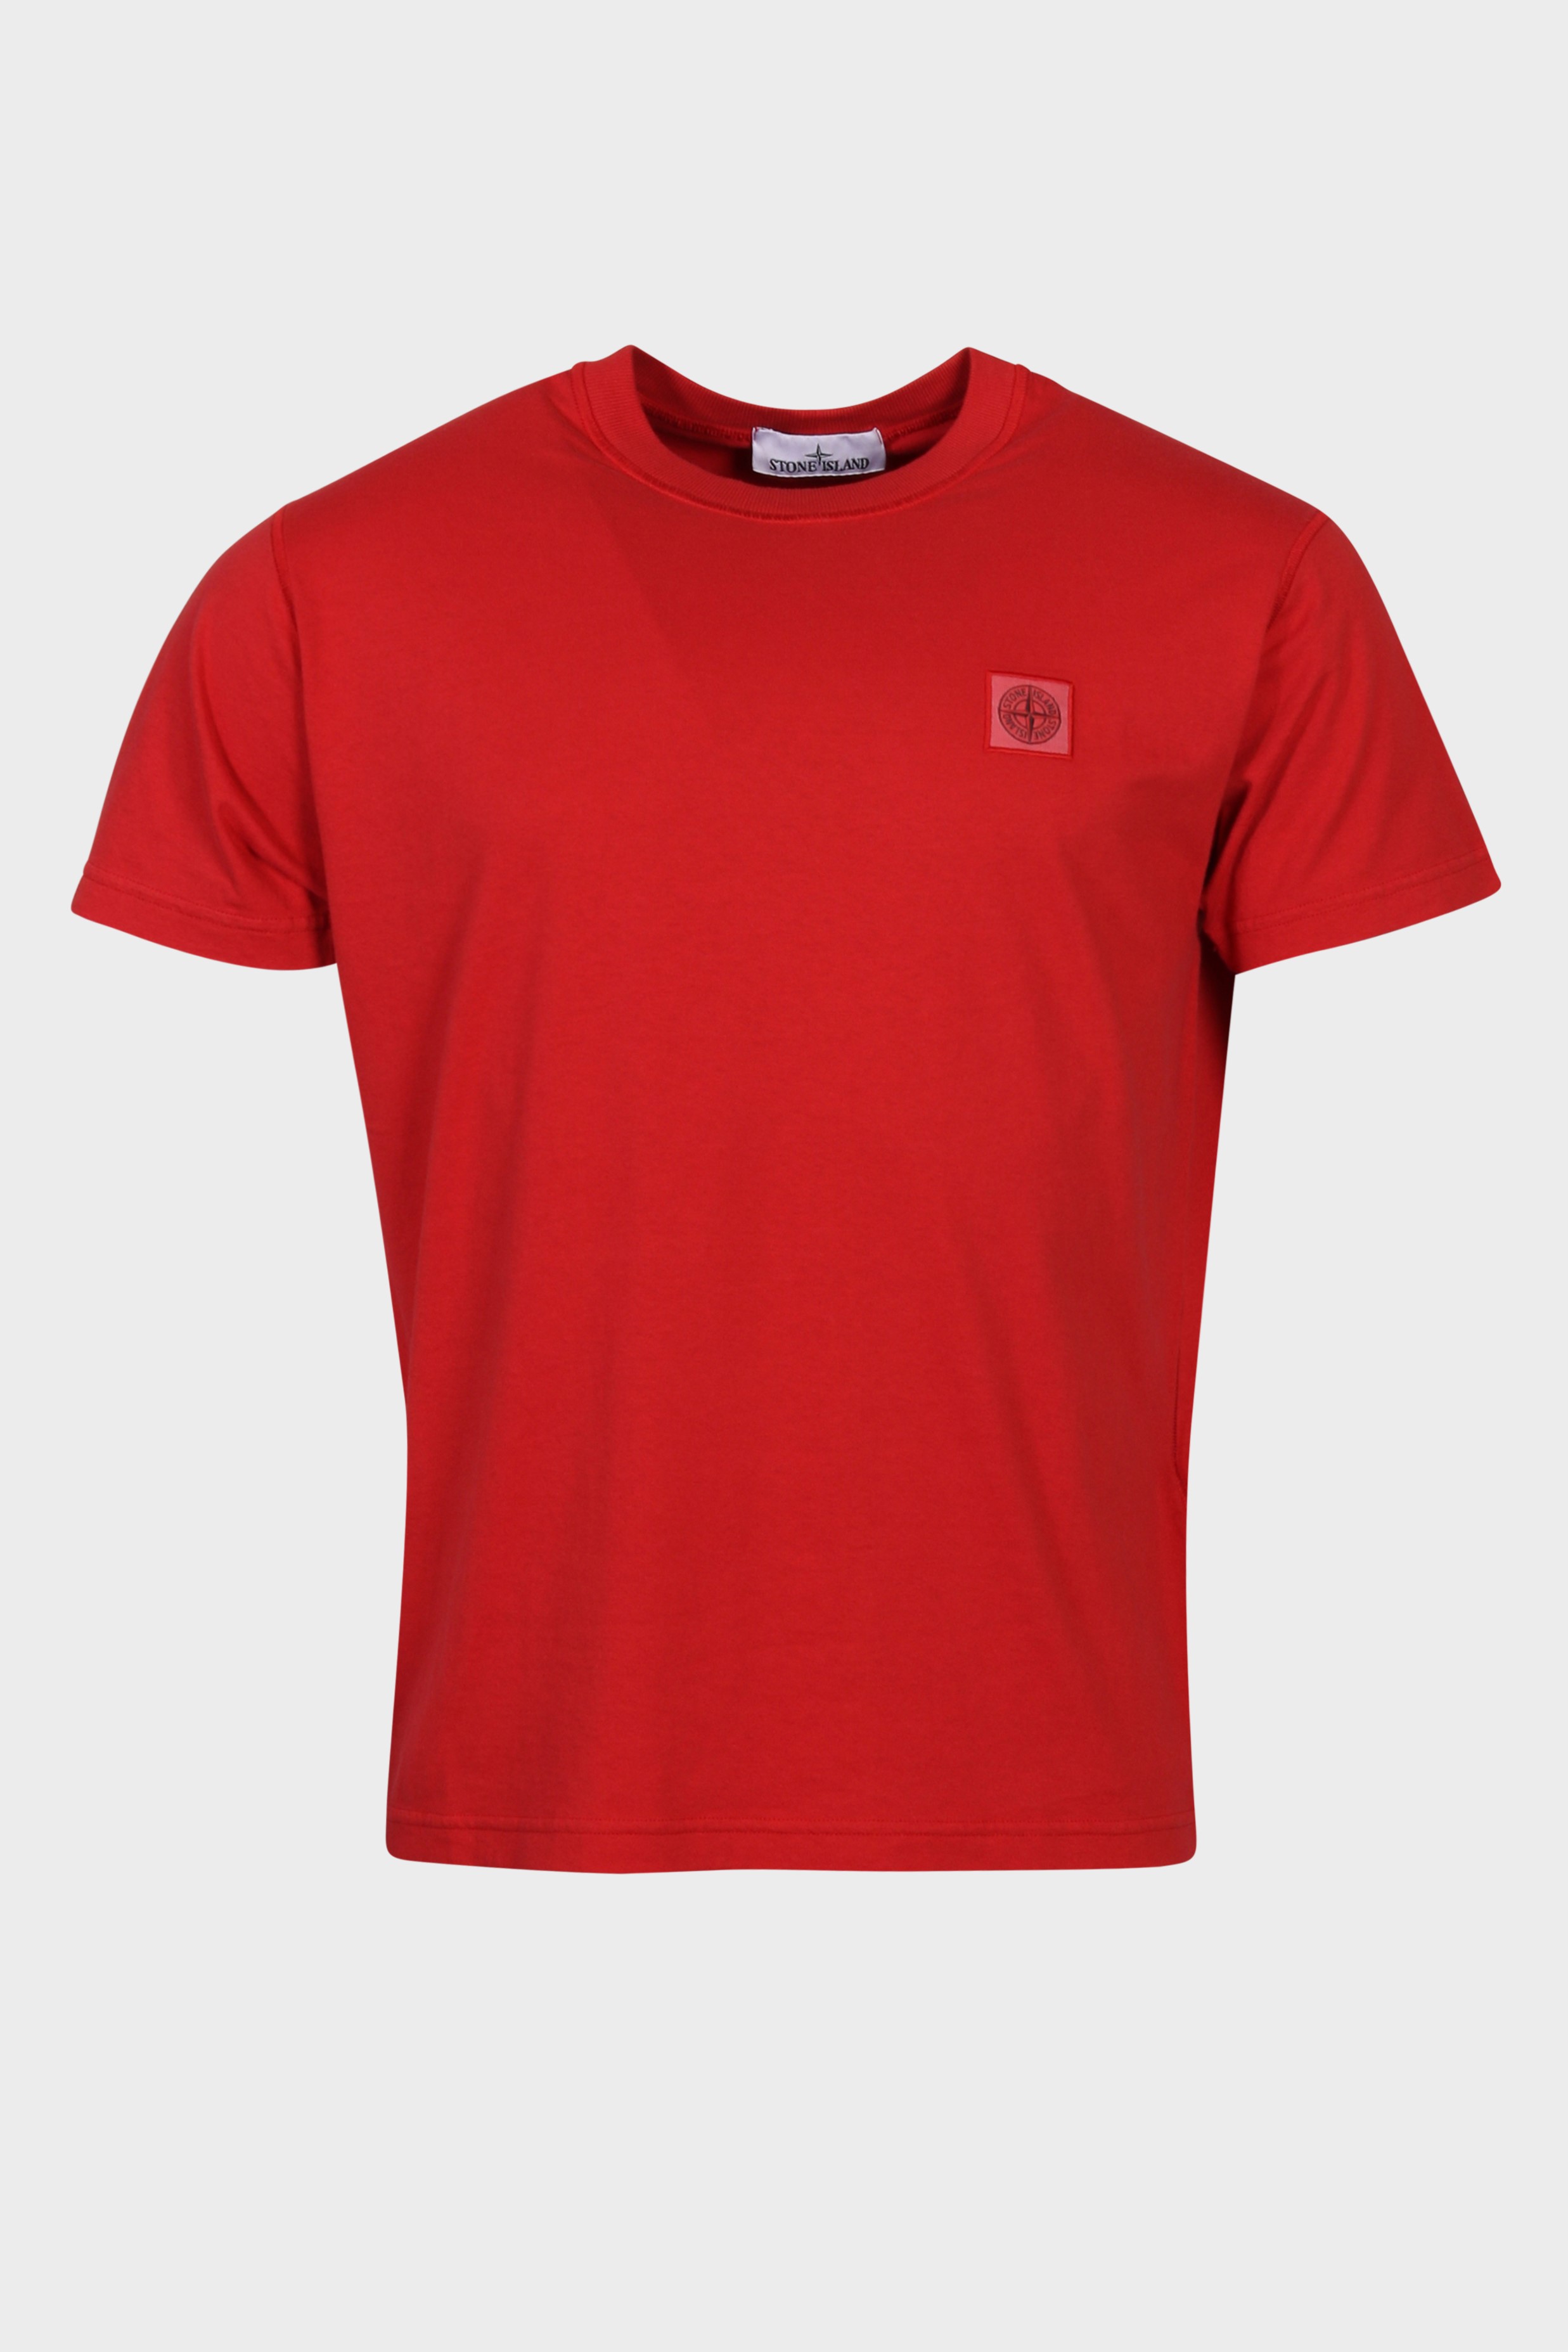 STONE ISLAND T-Shirt in Red M